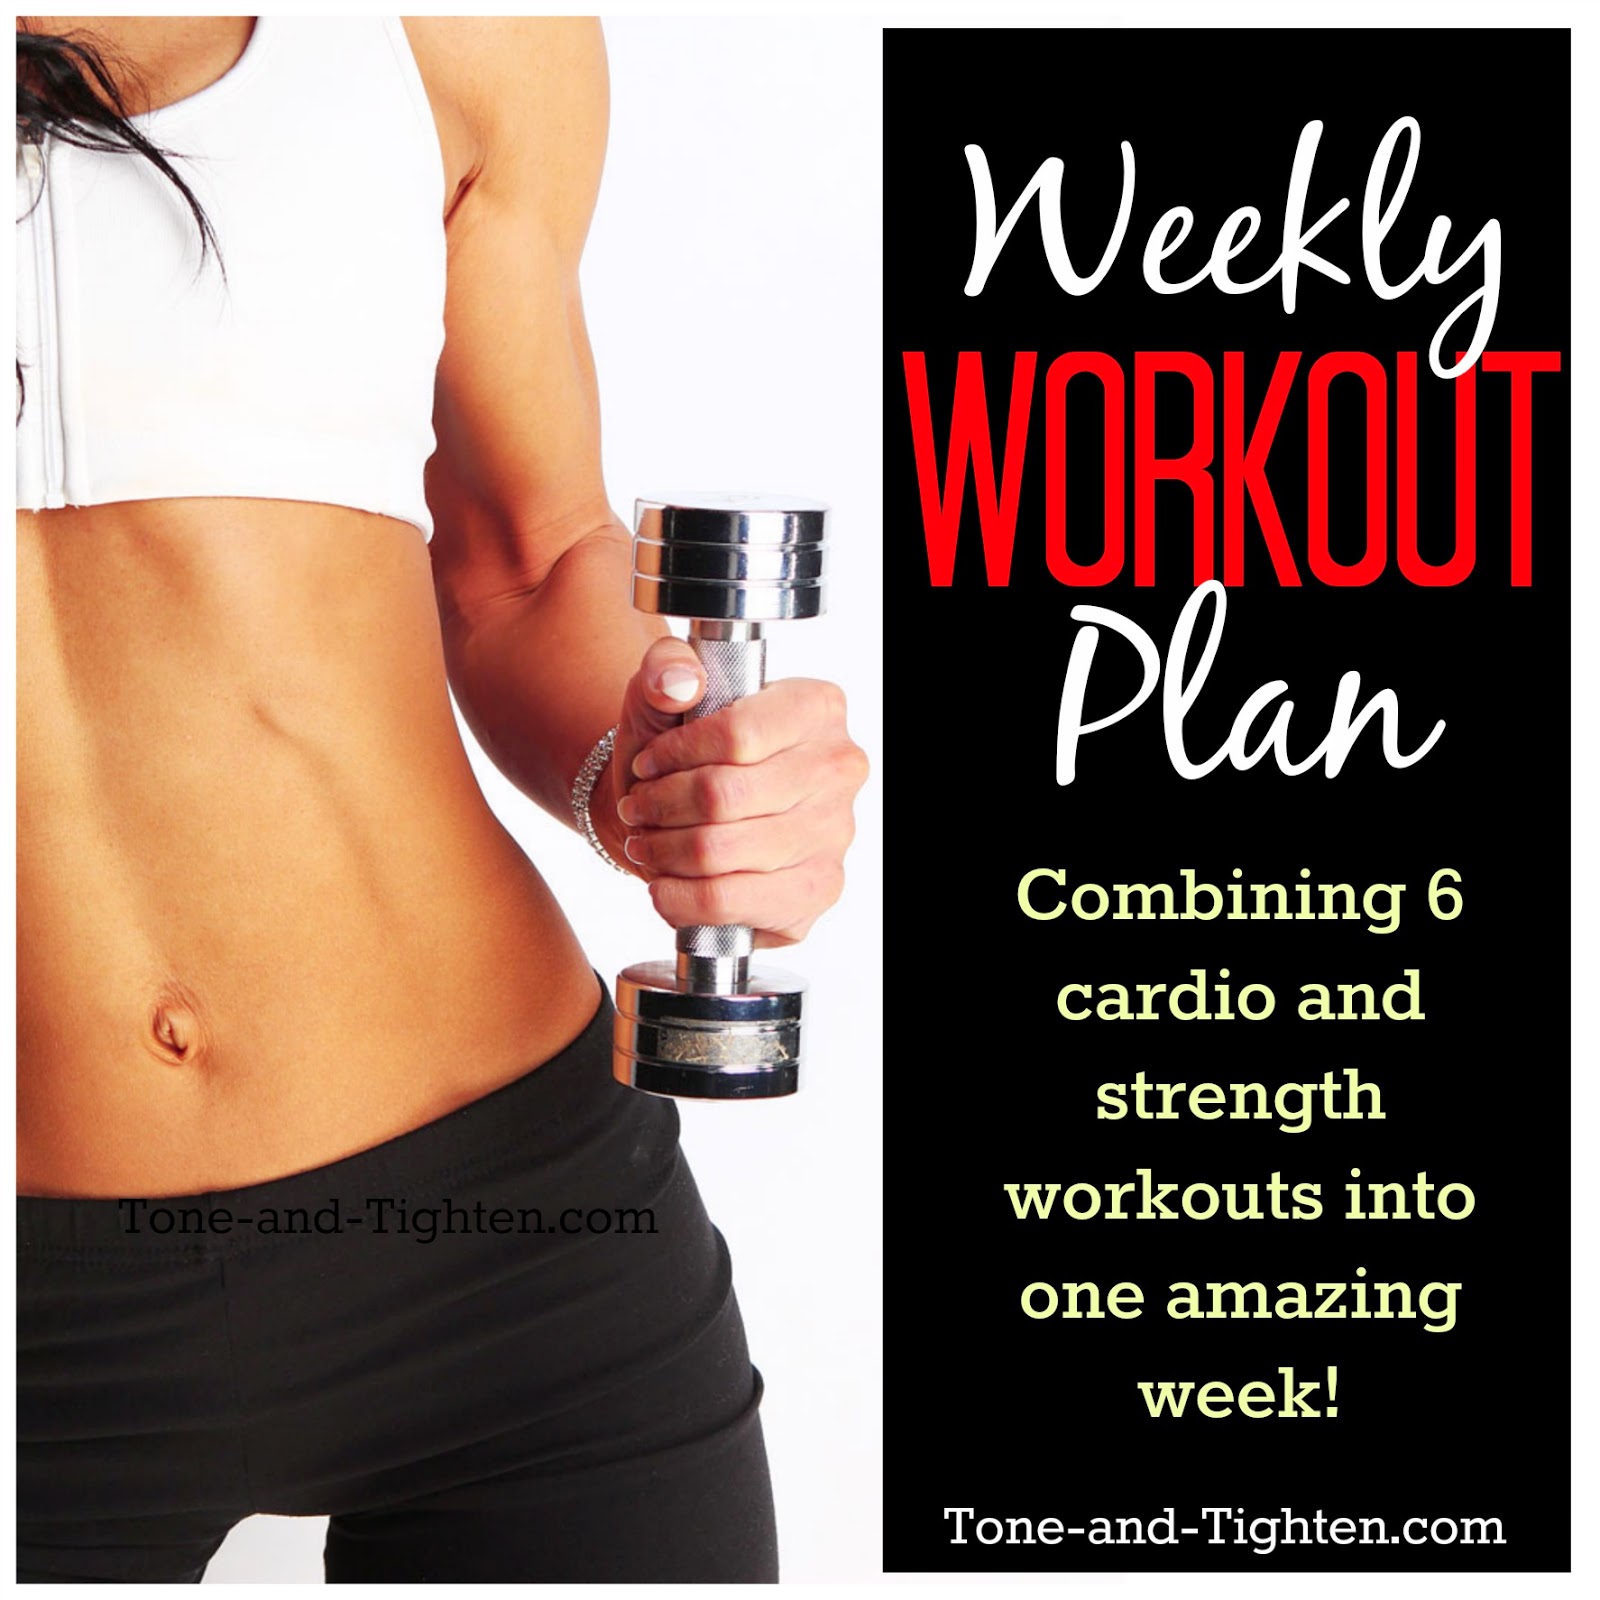 Weekly Workout Plan - 5 of the best outdoor workouts! 